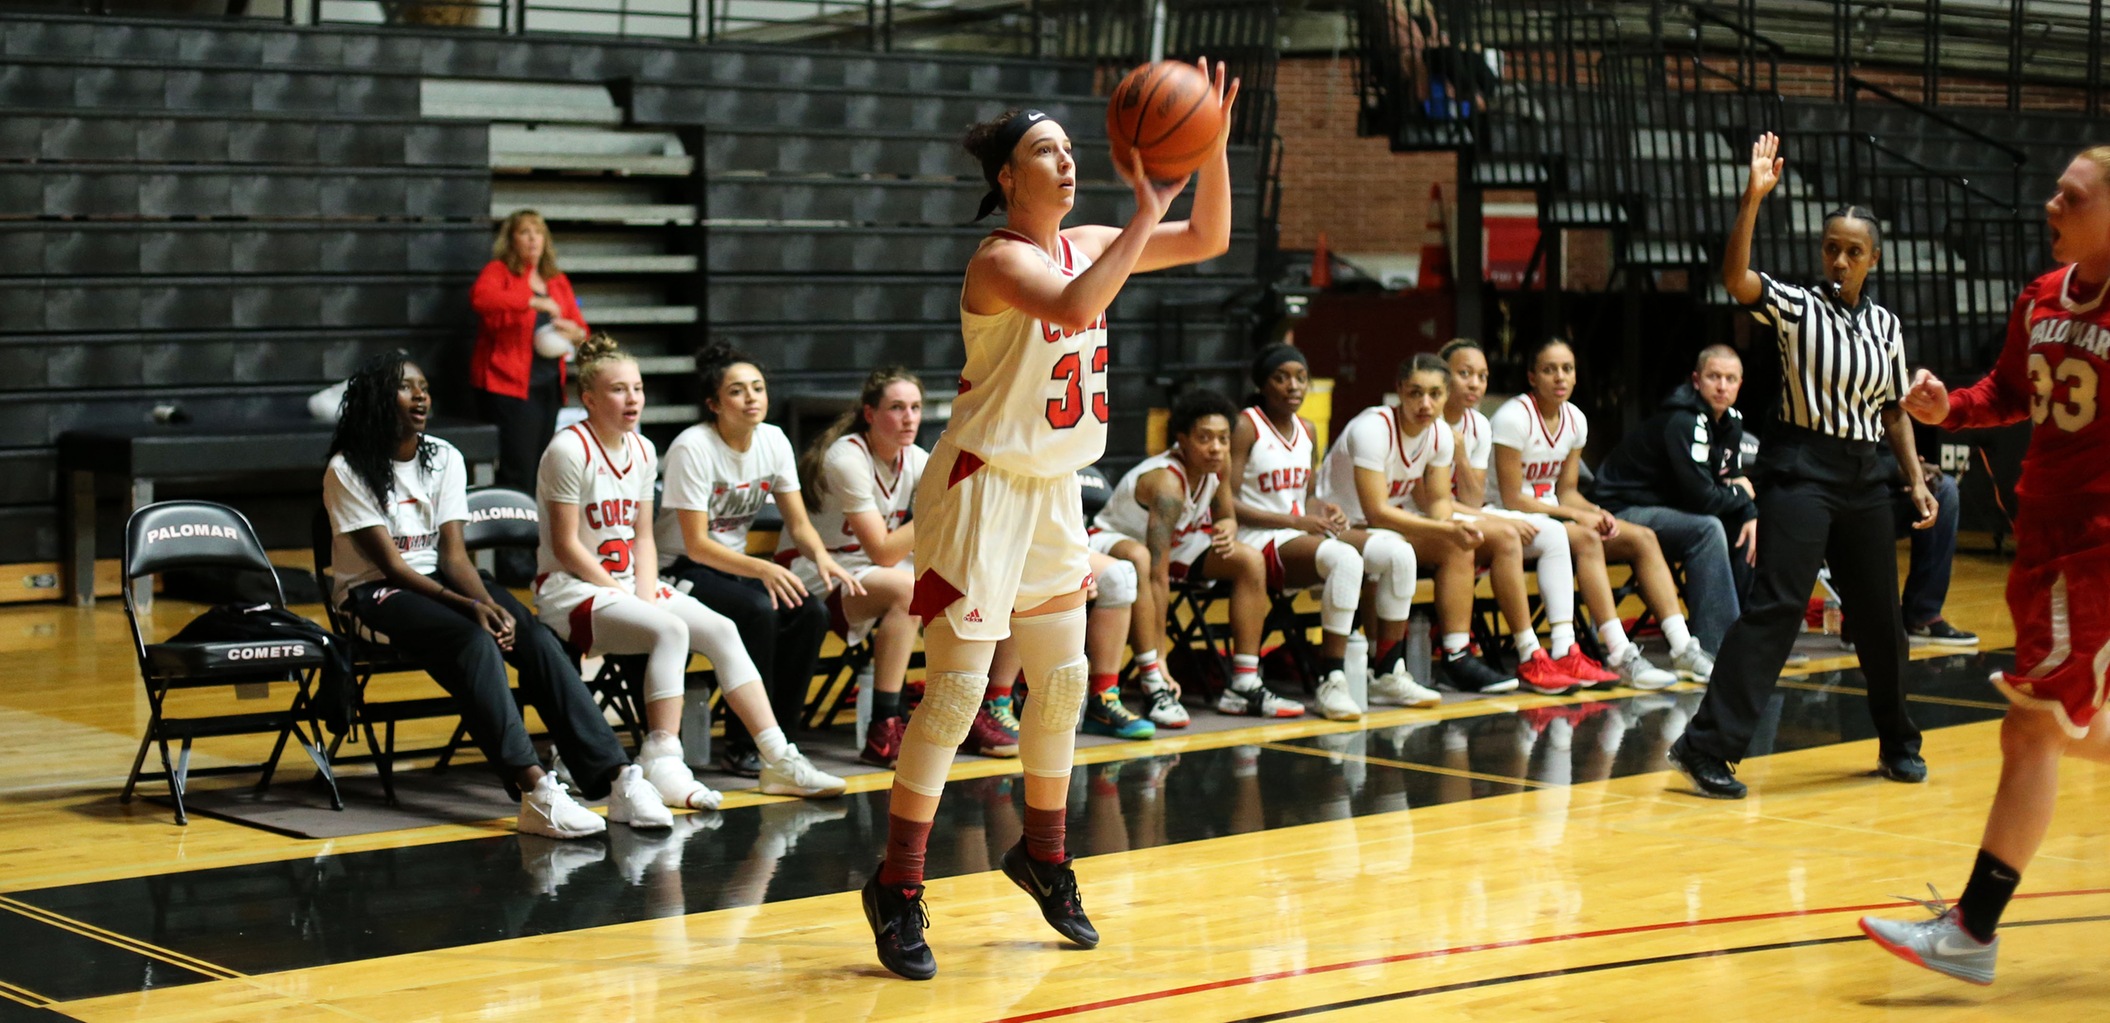 Morgan Heise fires away one of her four 3-pointers. -- Photo by Hugh Cox